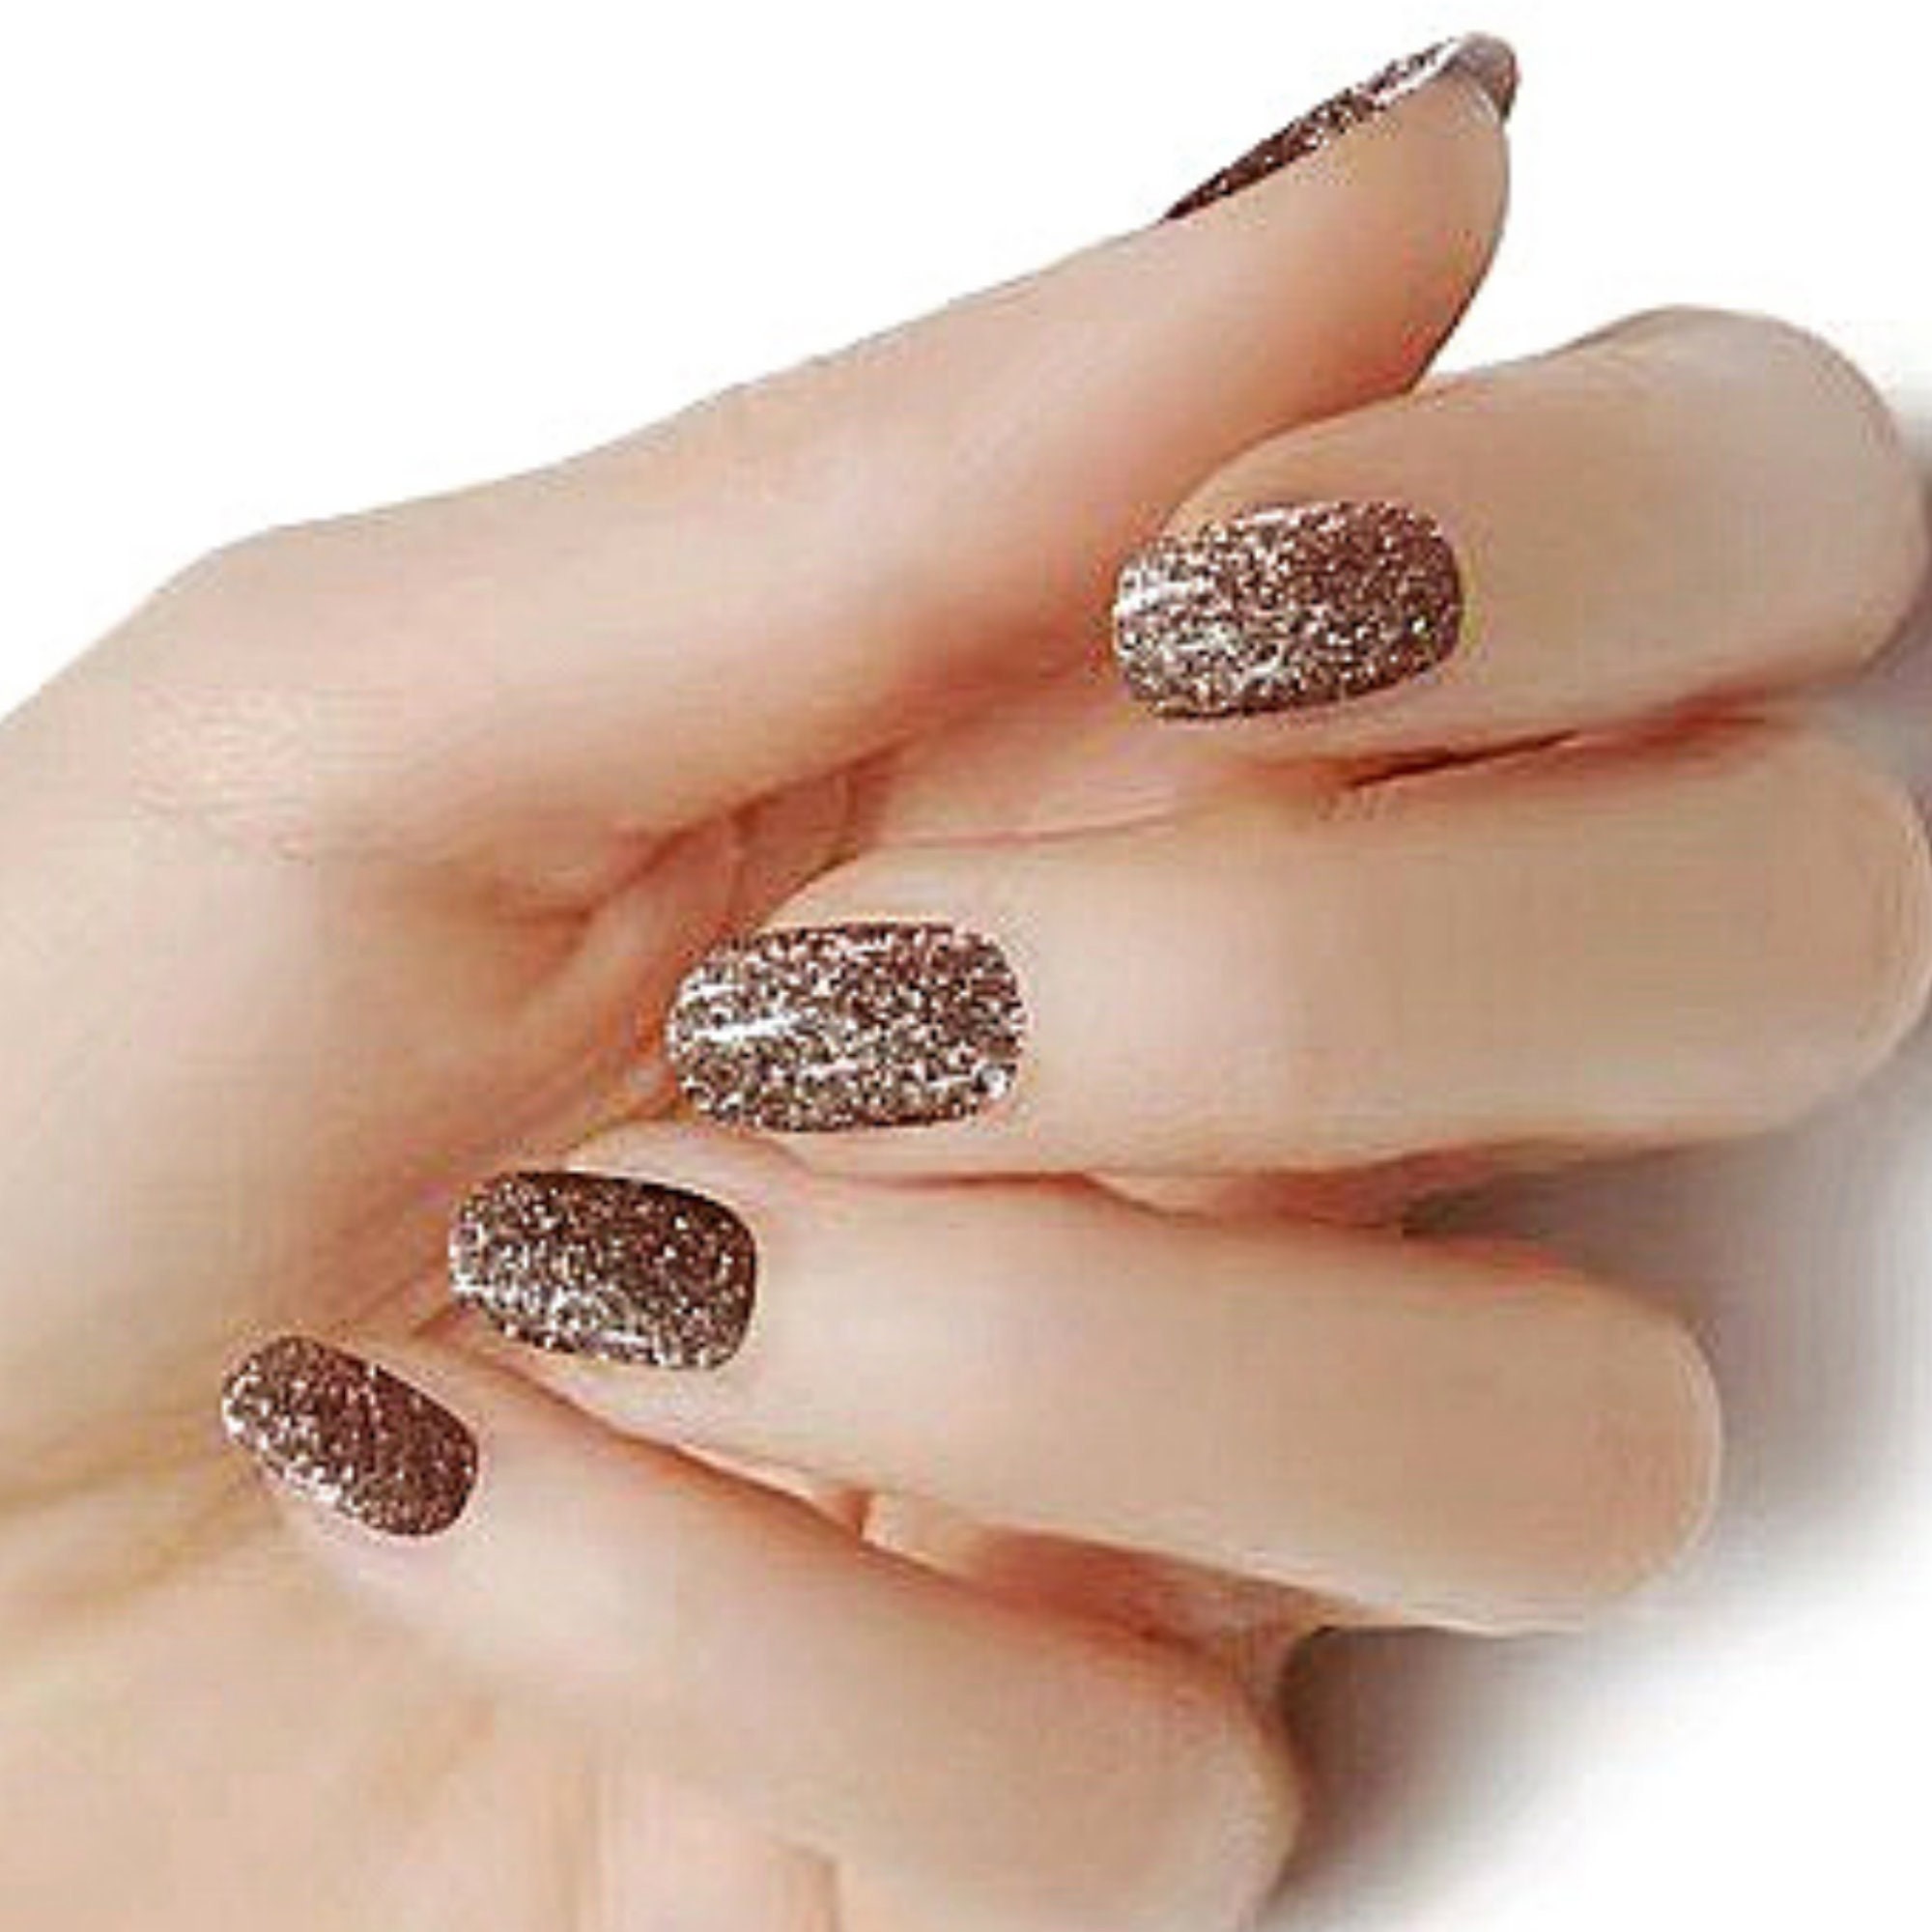 Bronze Brown Color Wraps Solid Glitter Real Nail Polish Strips M33 Street  Art 